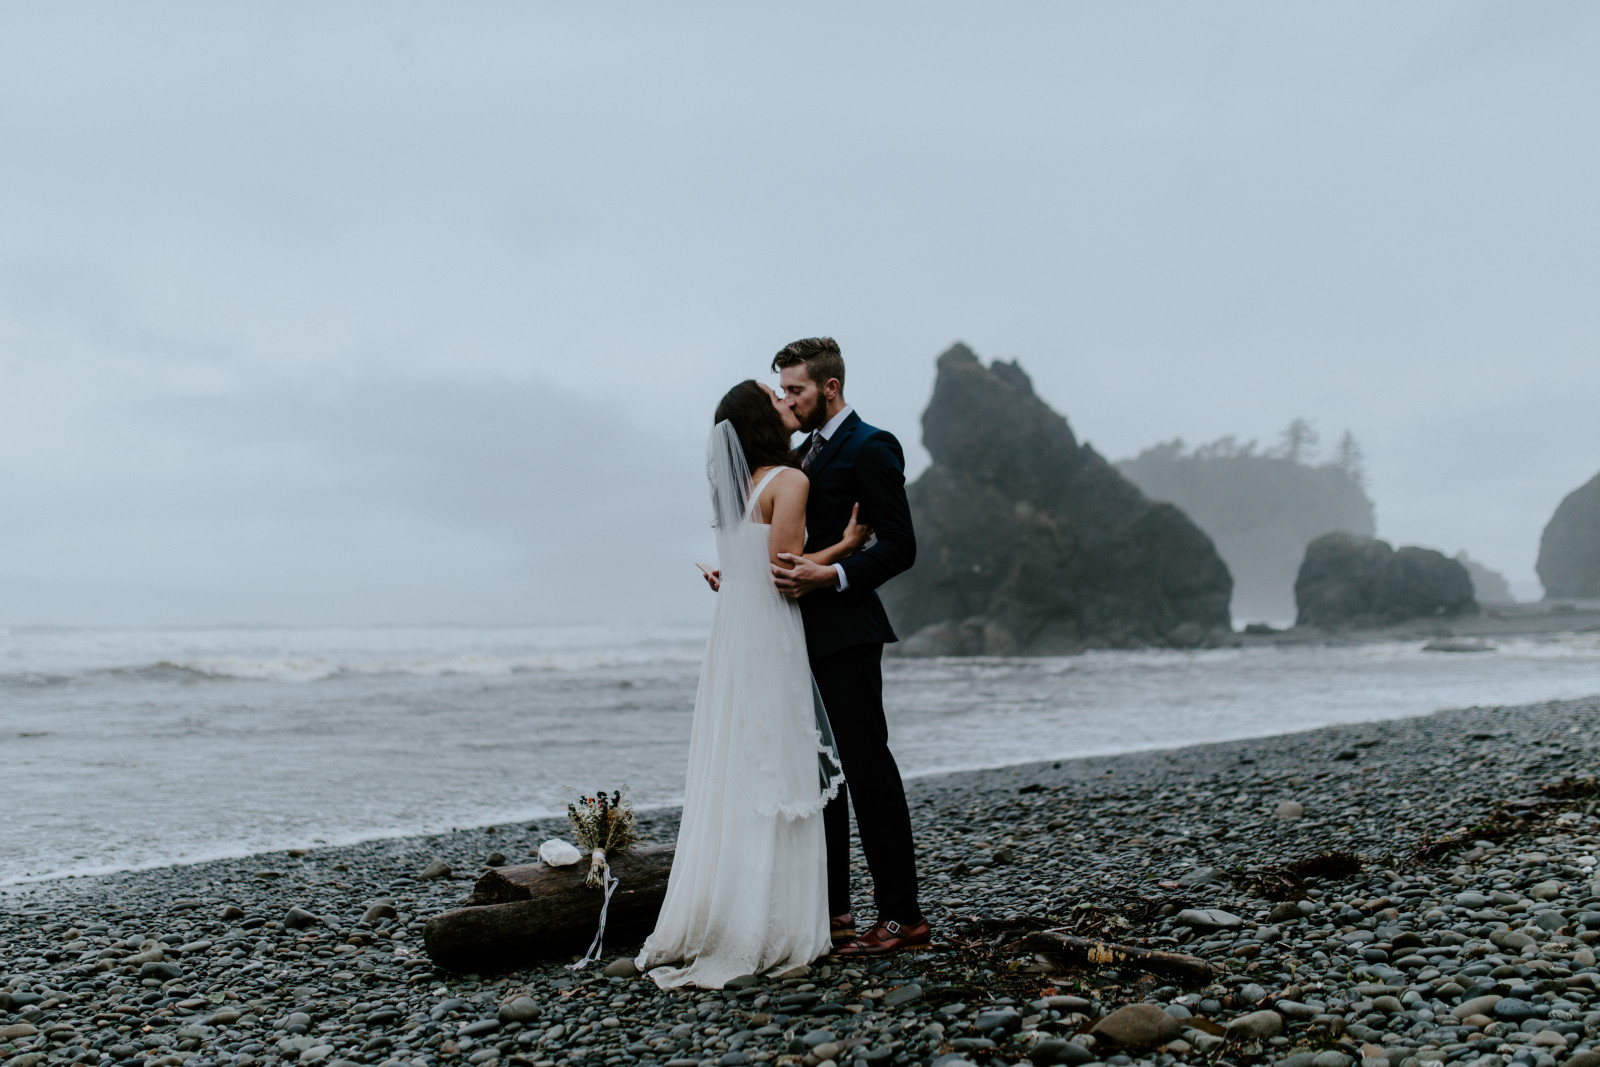 Mollie and Corey kiss on a foggy beach. Elopement photography at Olympic National Park by Sienna Plus Josh.